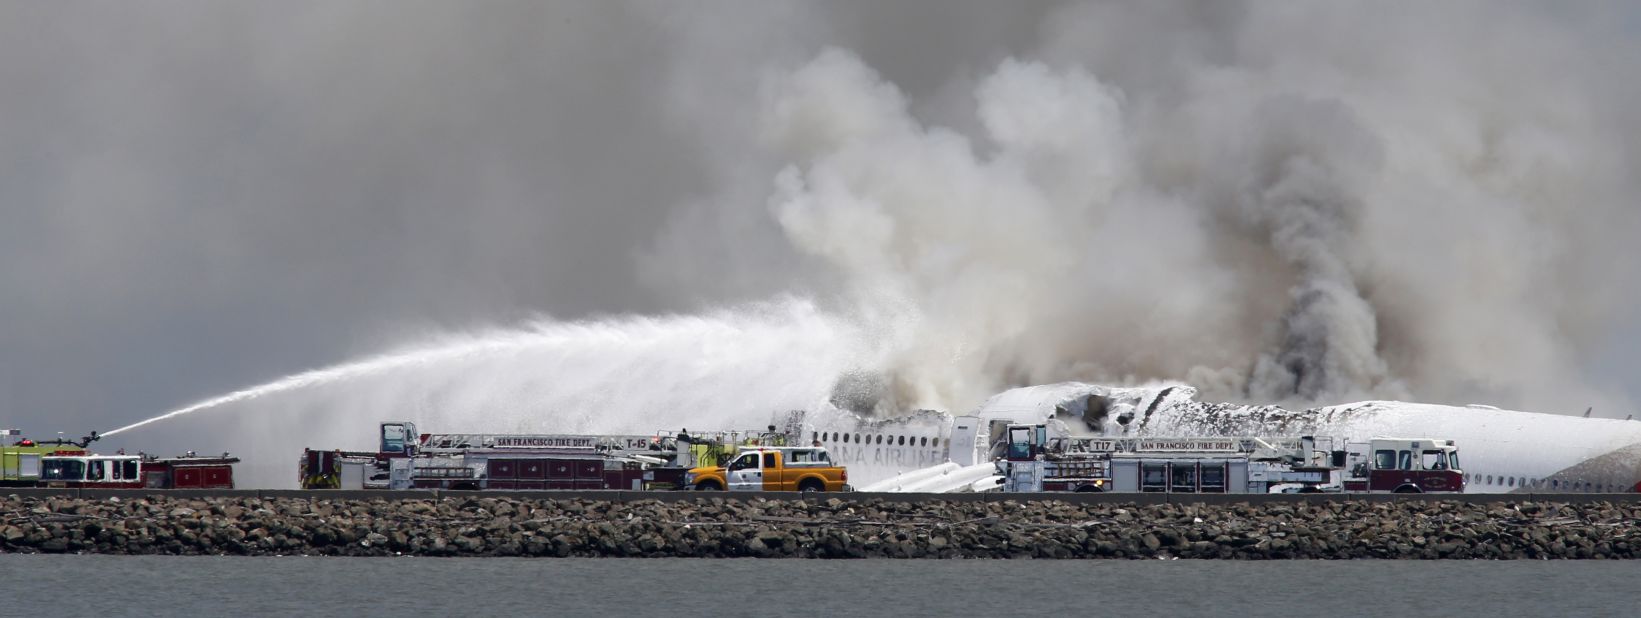 Fire crews work at the crash site at San Francisco International Airport on July 6.